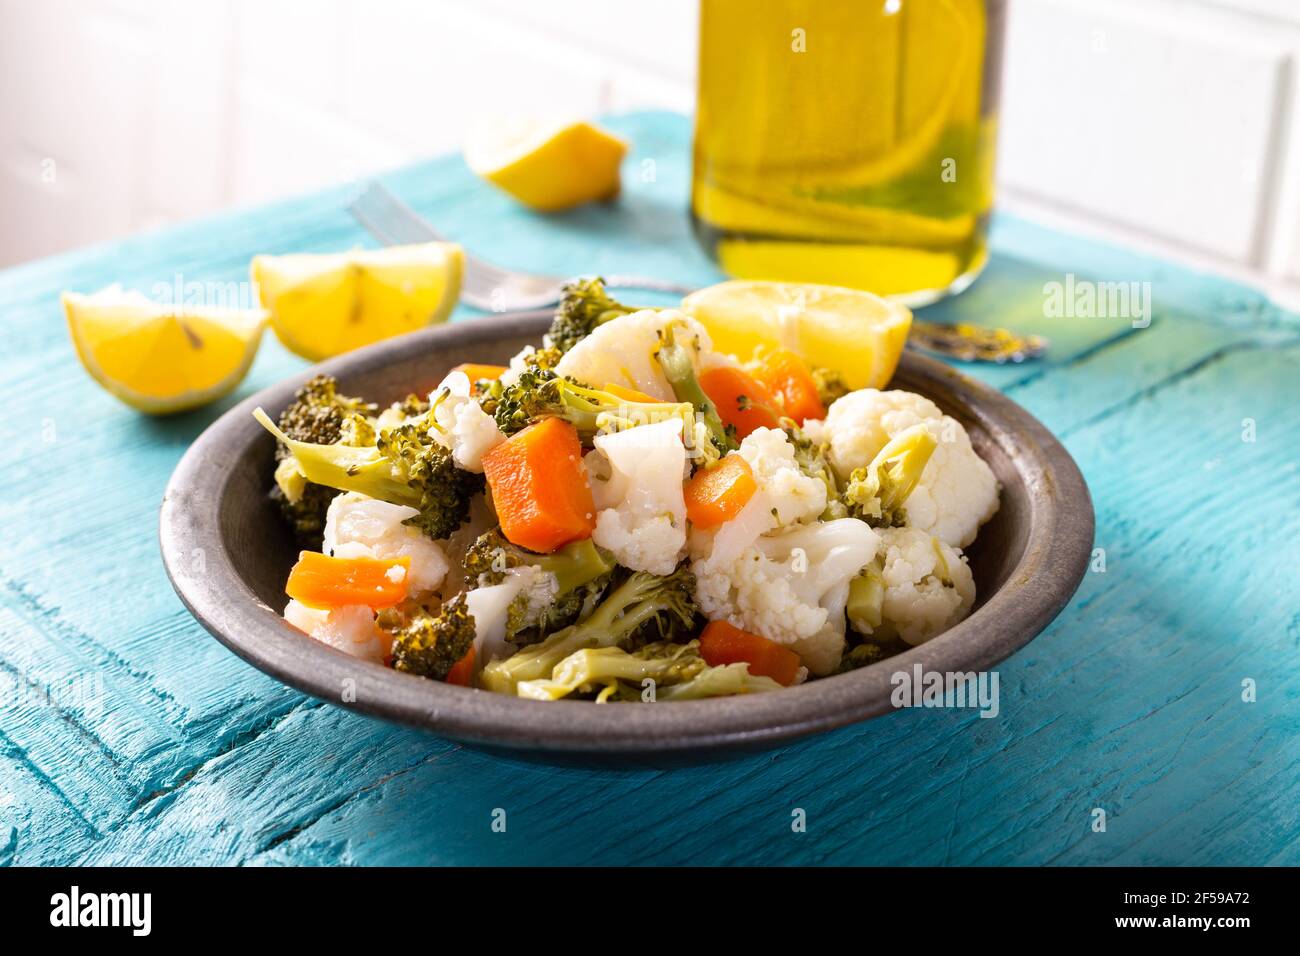 Broccoli, cauliflower and carrot salad in bowl on blue wooden table with olive oil and lemon slices. Stock Photo